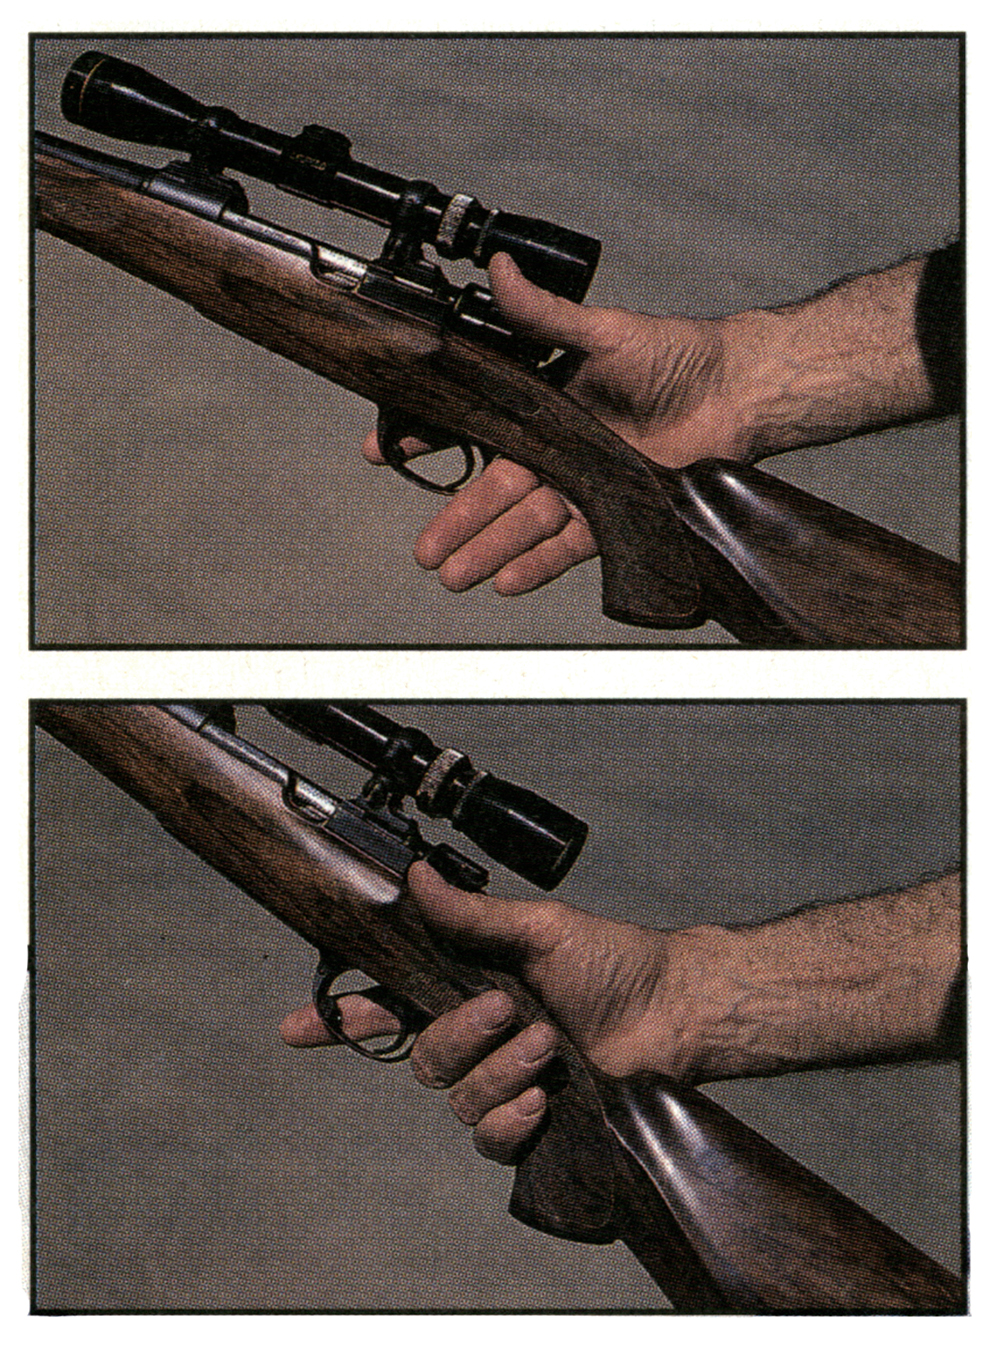 Two photos showing hands holding rifle.